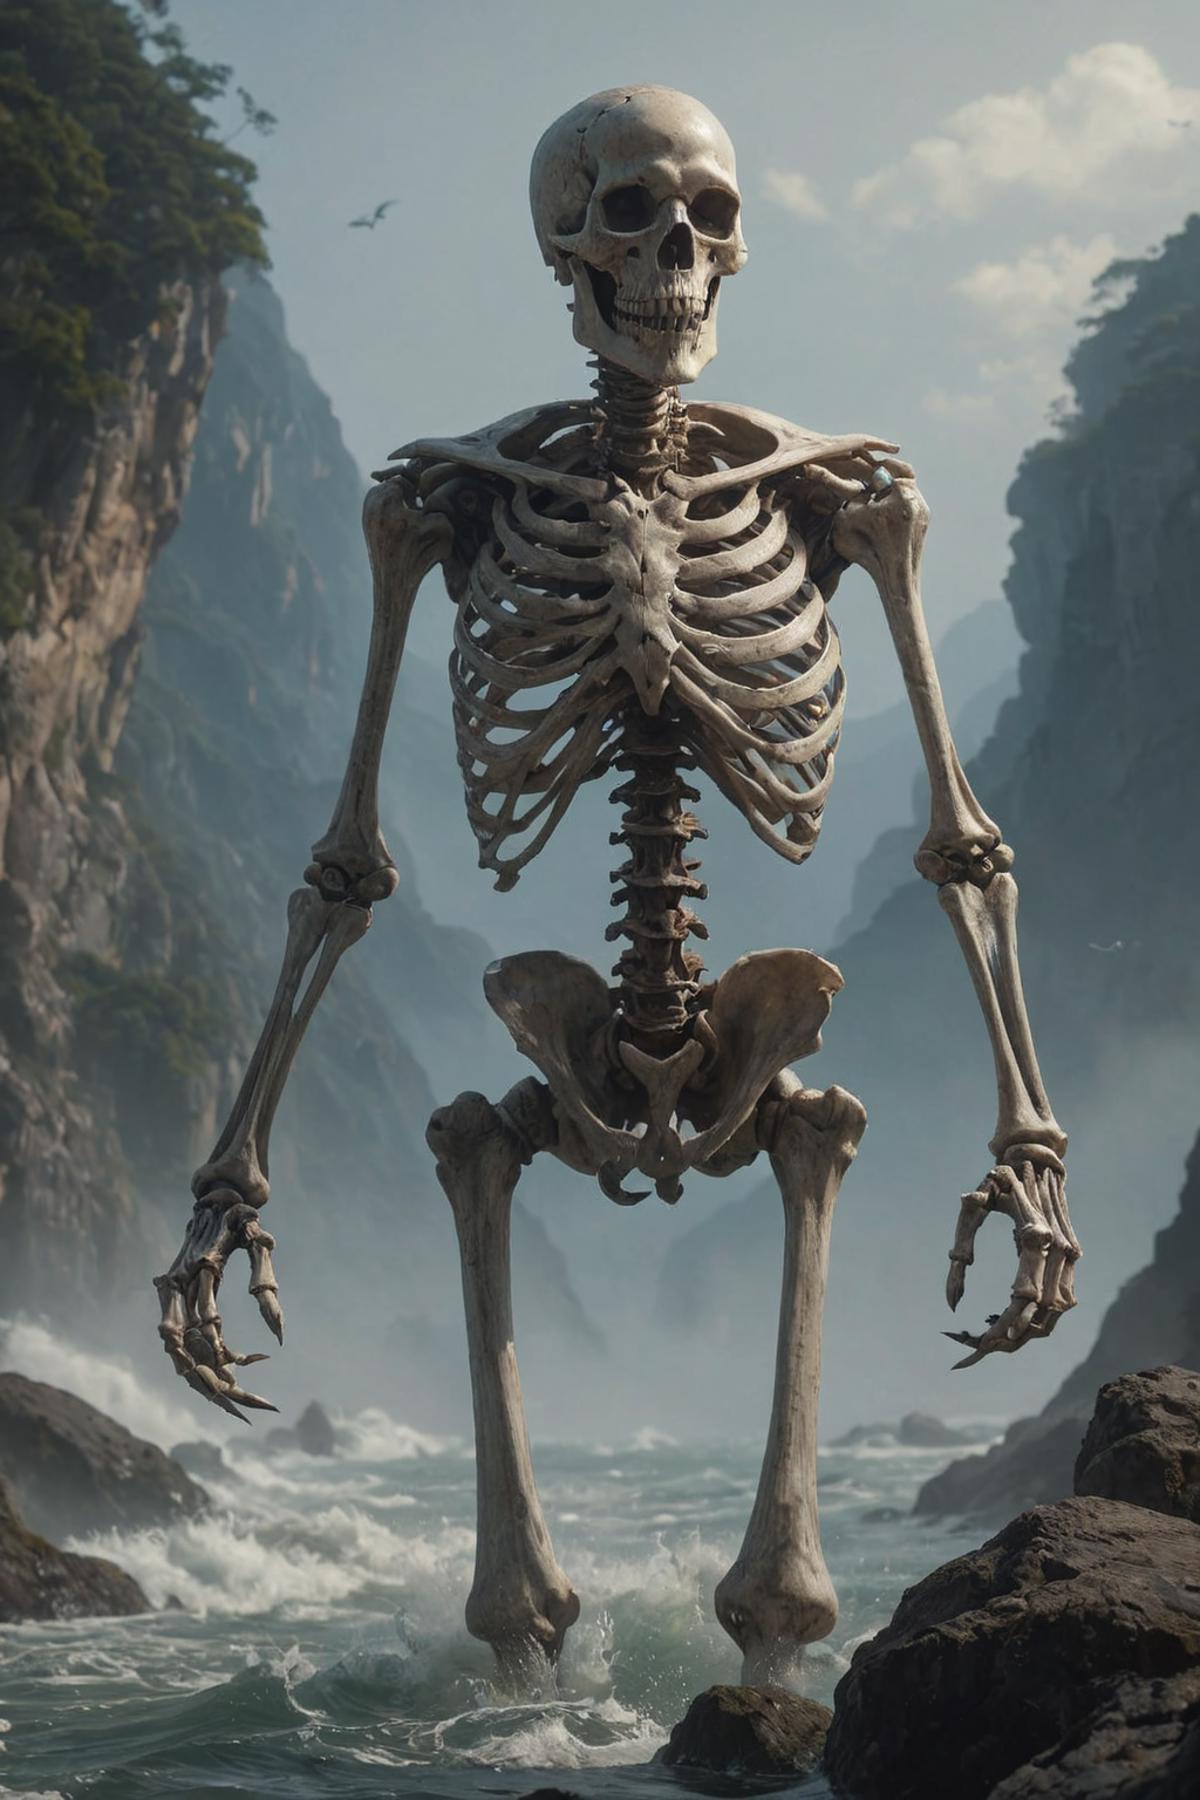 A skeleton standing in front of a waterfall, with a mountainous background.